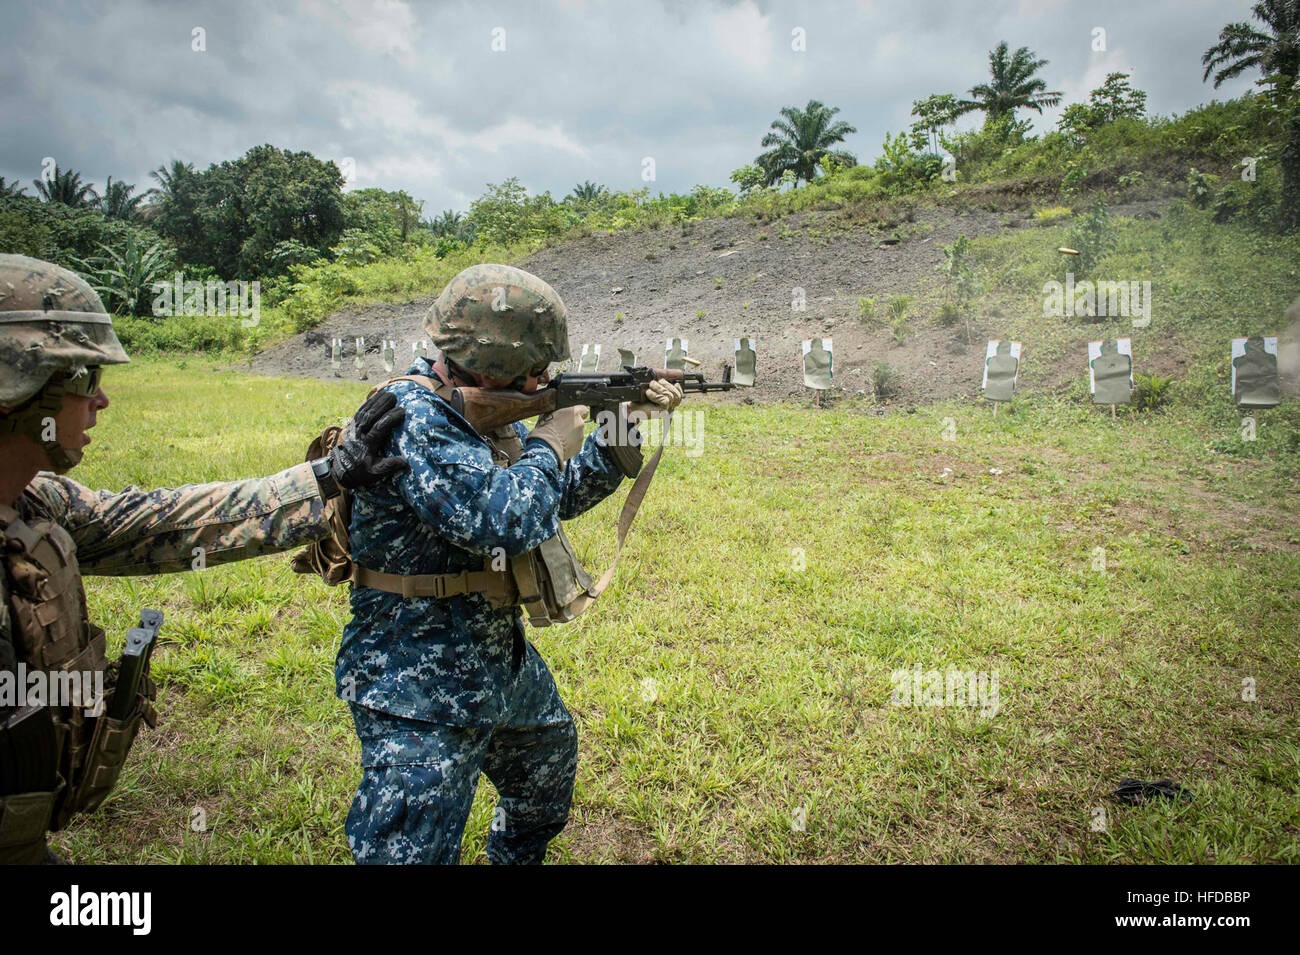 150314-N-JP249-100 ISSONGO, Cameroon (March 14, 2015) U.S. 6th Fleet Vice Commander Rear Adm. Tom Reck fires an AK-47 assault rifle March 14, 2015, on a military live-fire range in Issongo, Cameroon, during Africa Partnership Station.. Africa Partnership Station, an international collaborative capacity-building program, is being conducted in conjunction with a scheduled deployment by the Military Sealift Command’s joint high-speed vessel USNS Spearhead (JHSV 1). (U.S. Navy photo by Mass Communication Specialist 2nd Class Kenan O’Connor/Released) Africa Partnership Station 150314-N-JP249-100 Stock Photo